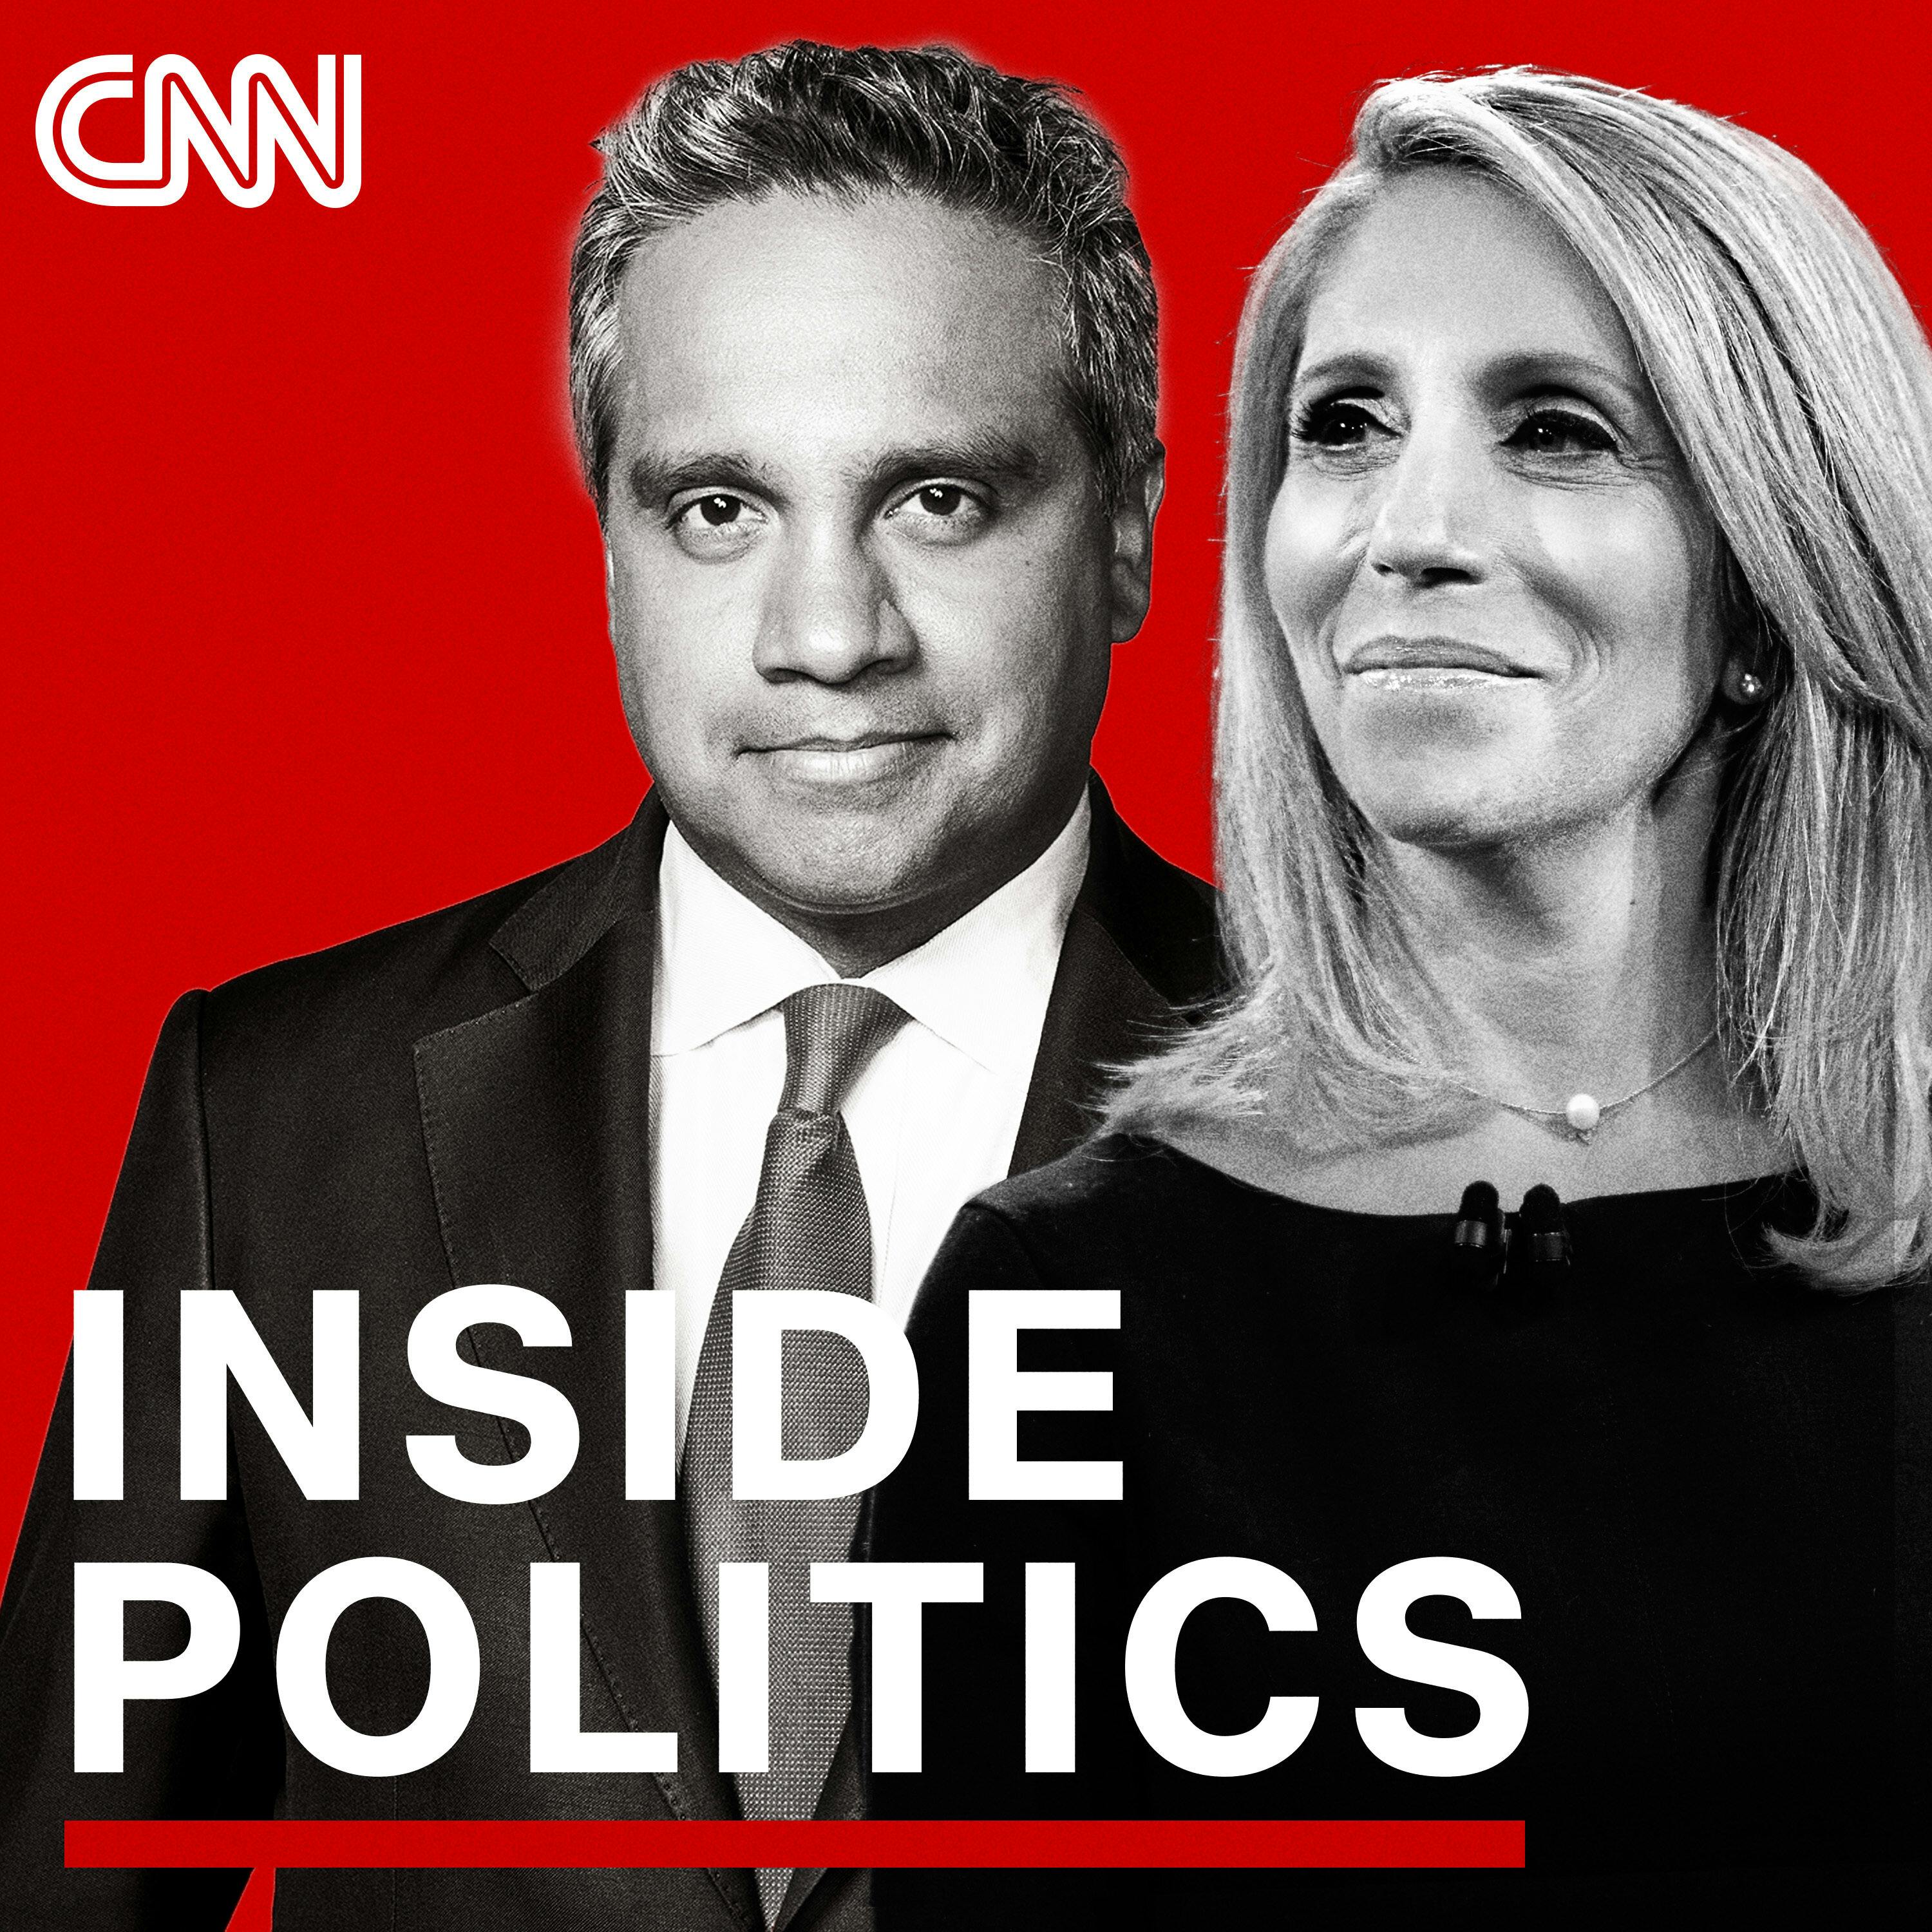 Inside Politics Podcast Update For Tuesday, August 24, 2021.